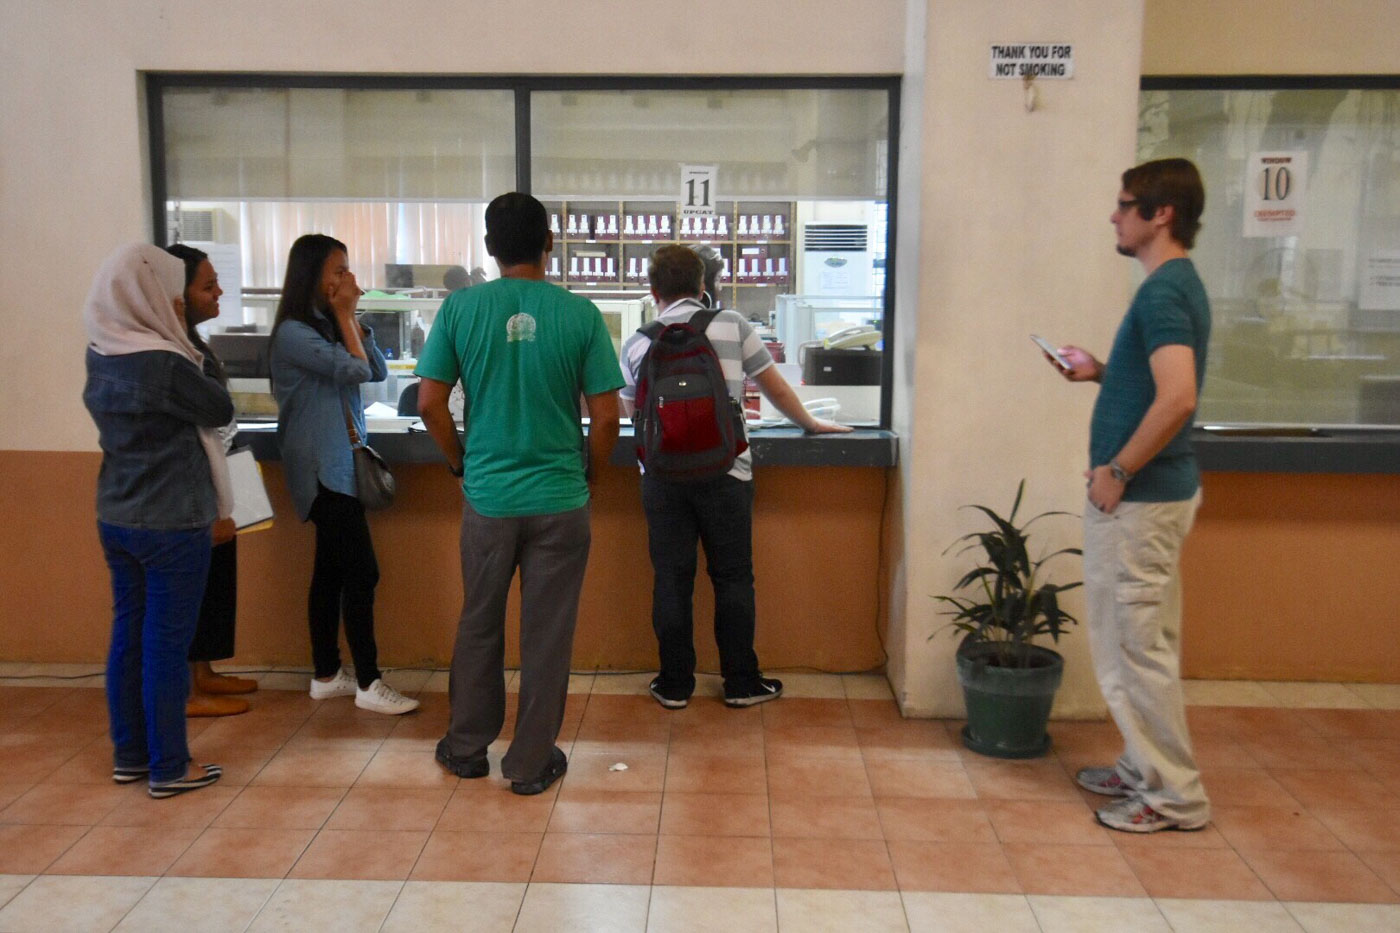 TEARY-EYED. Caalaman (3rd from right) asks the admission officer if she could take the exam in the afternoon after being denied entry to her testing room for arriving late 